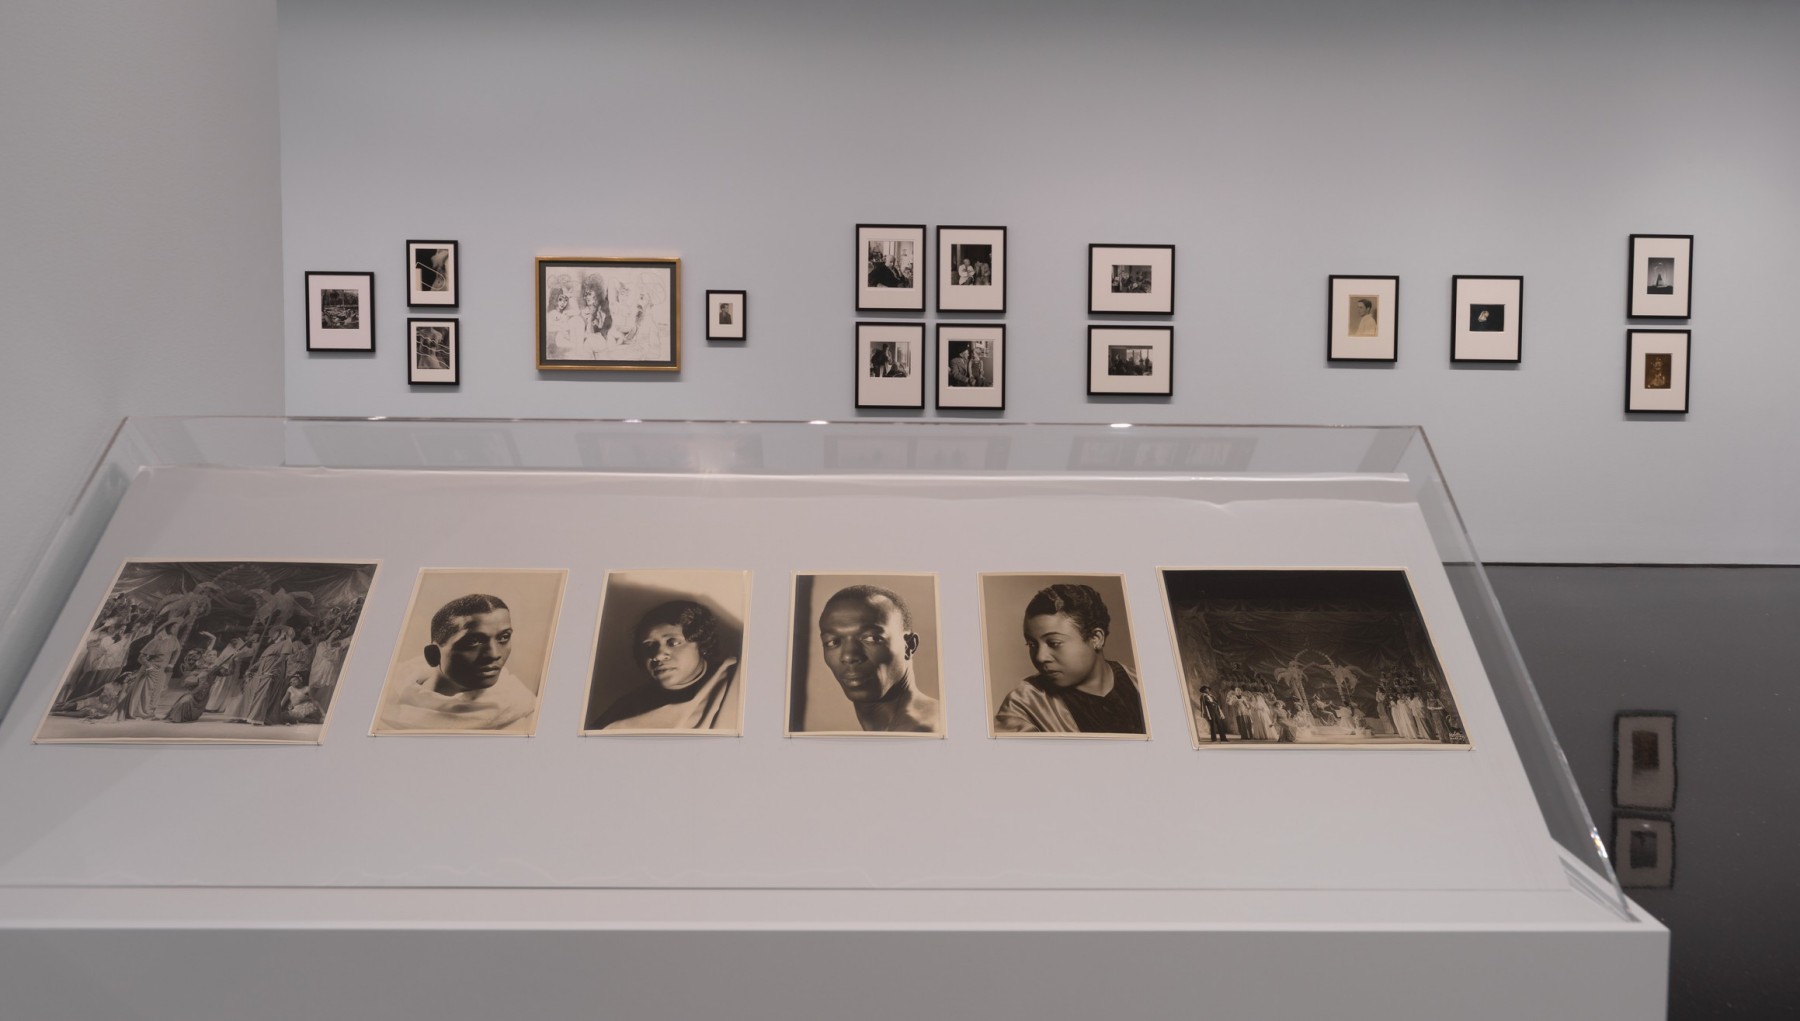 Installation image for Seeing Is Believing: Lee Miller and Friends, at Gagosian